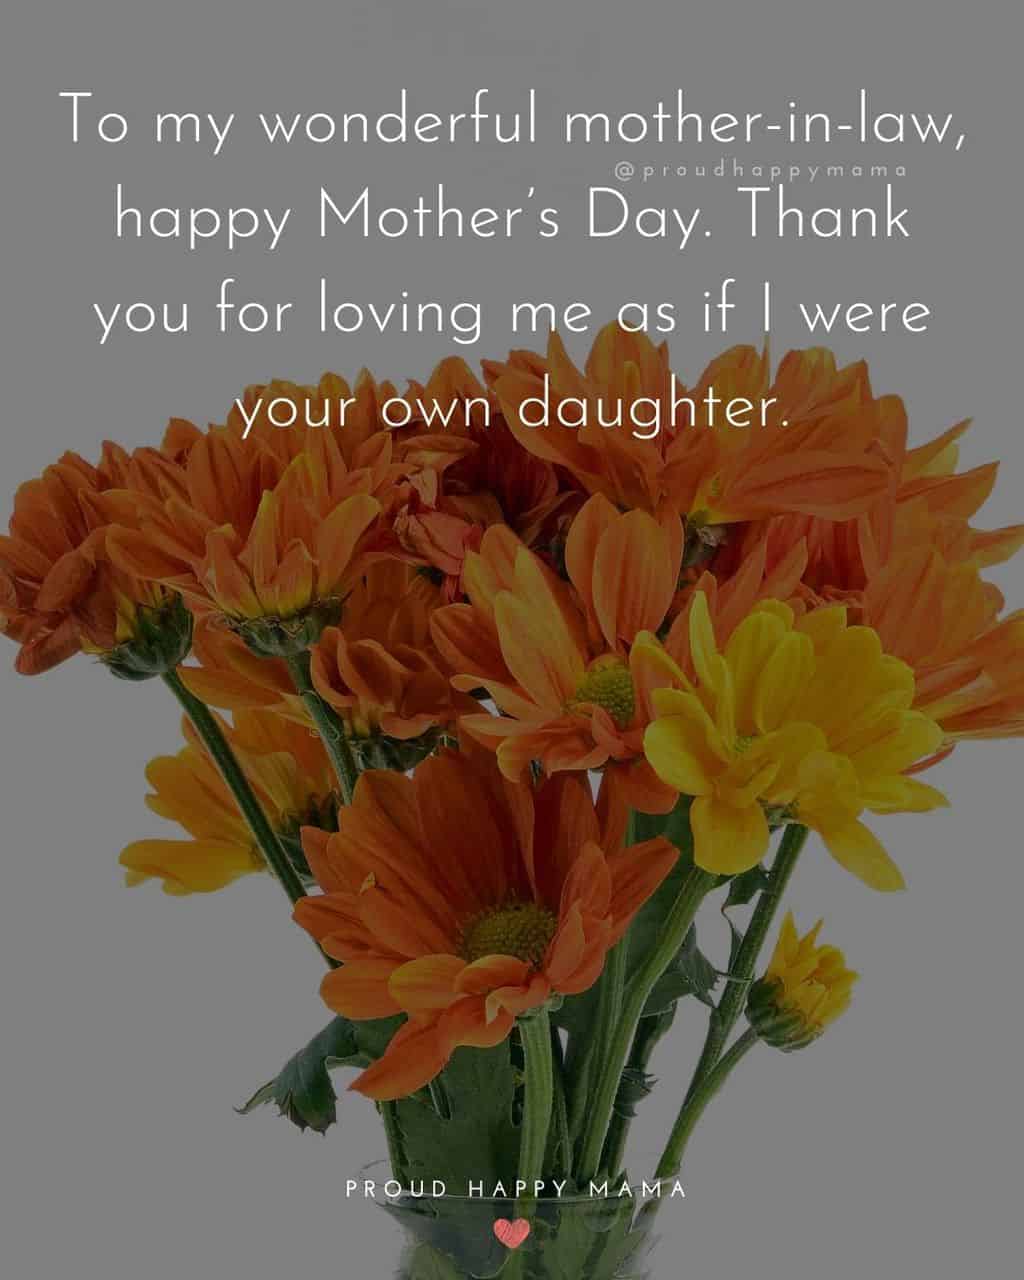 Happy Mothers Day Quotes For Mother In Law - To my wonderful mother in law, happy Mother’s Day. Thank you for loving me as if I